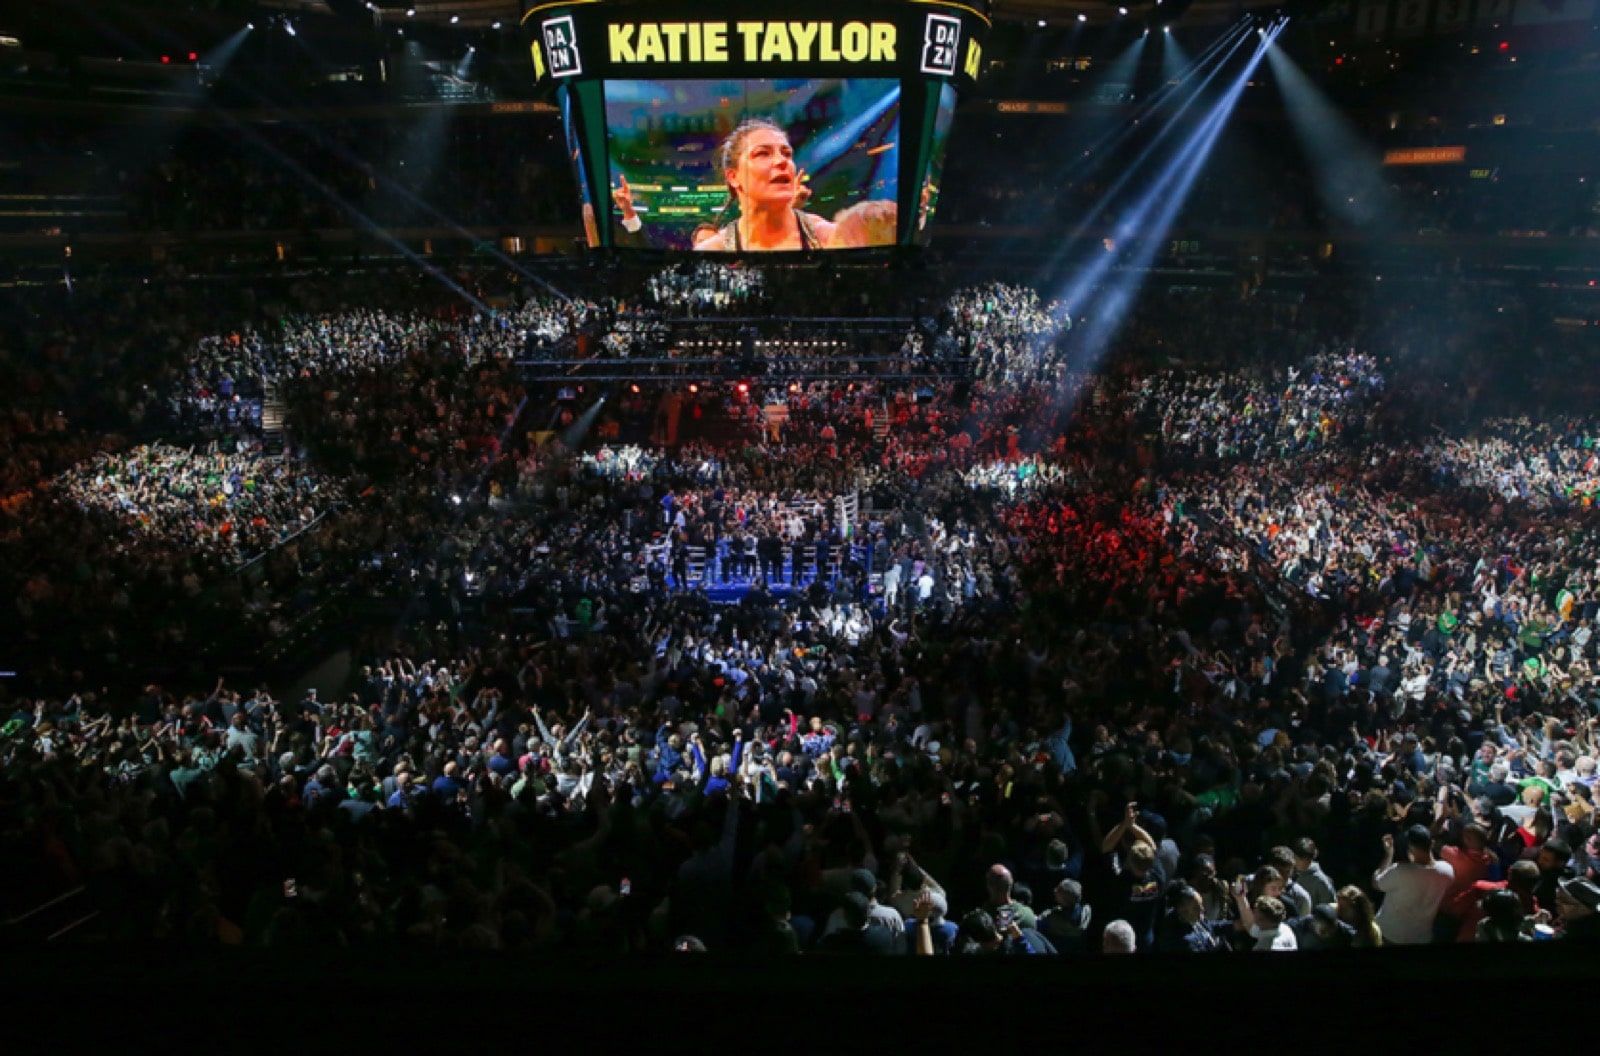 Taylor vs Serrano most watched female headlined boxing broadcast ever in history!